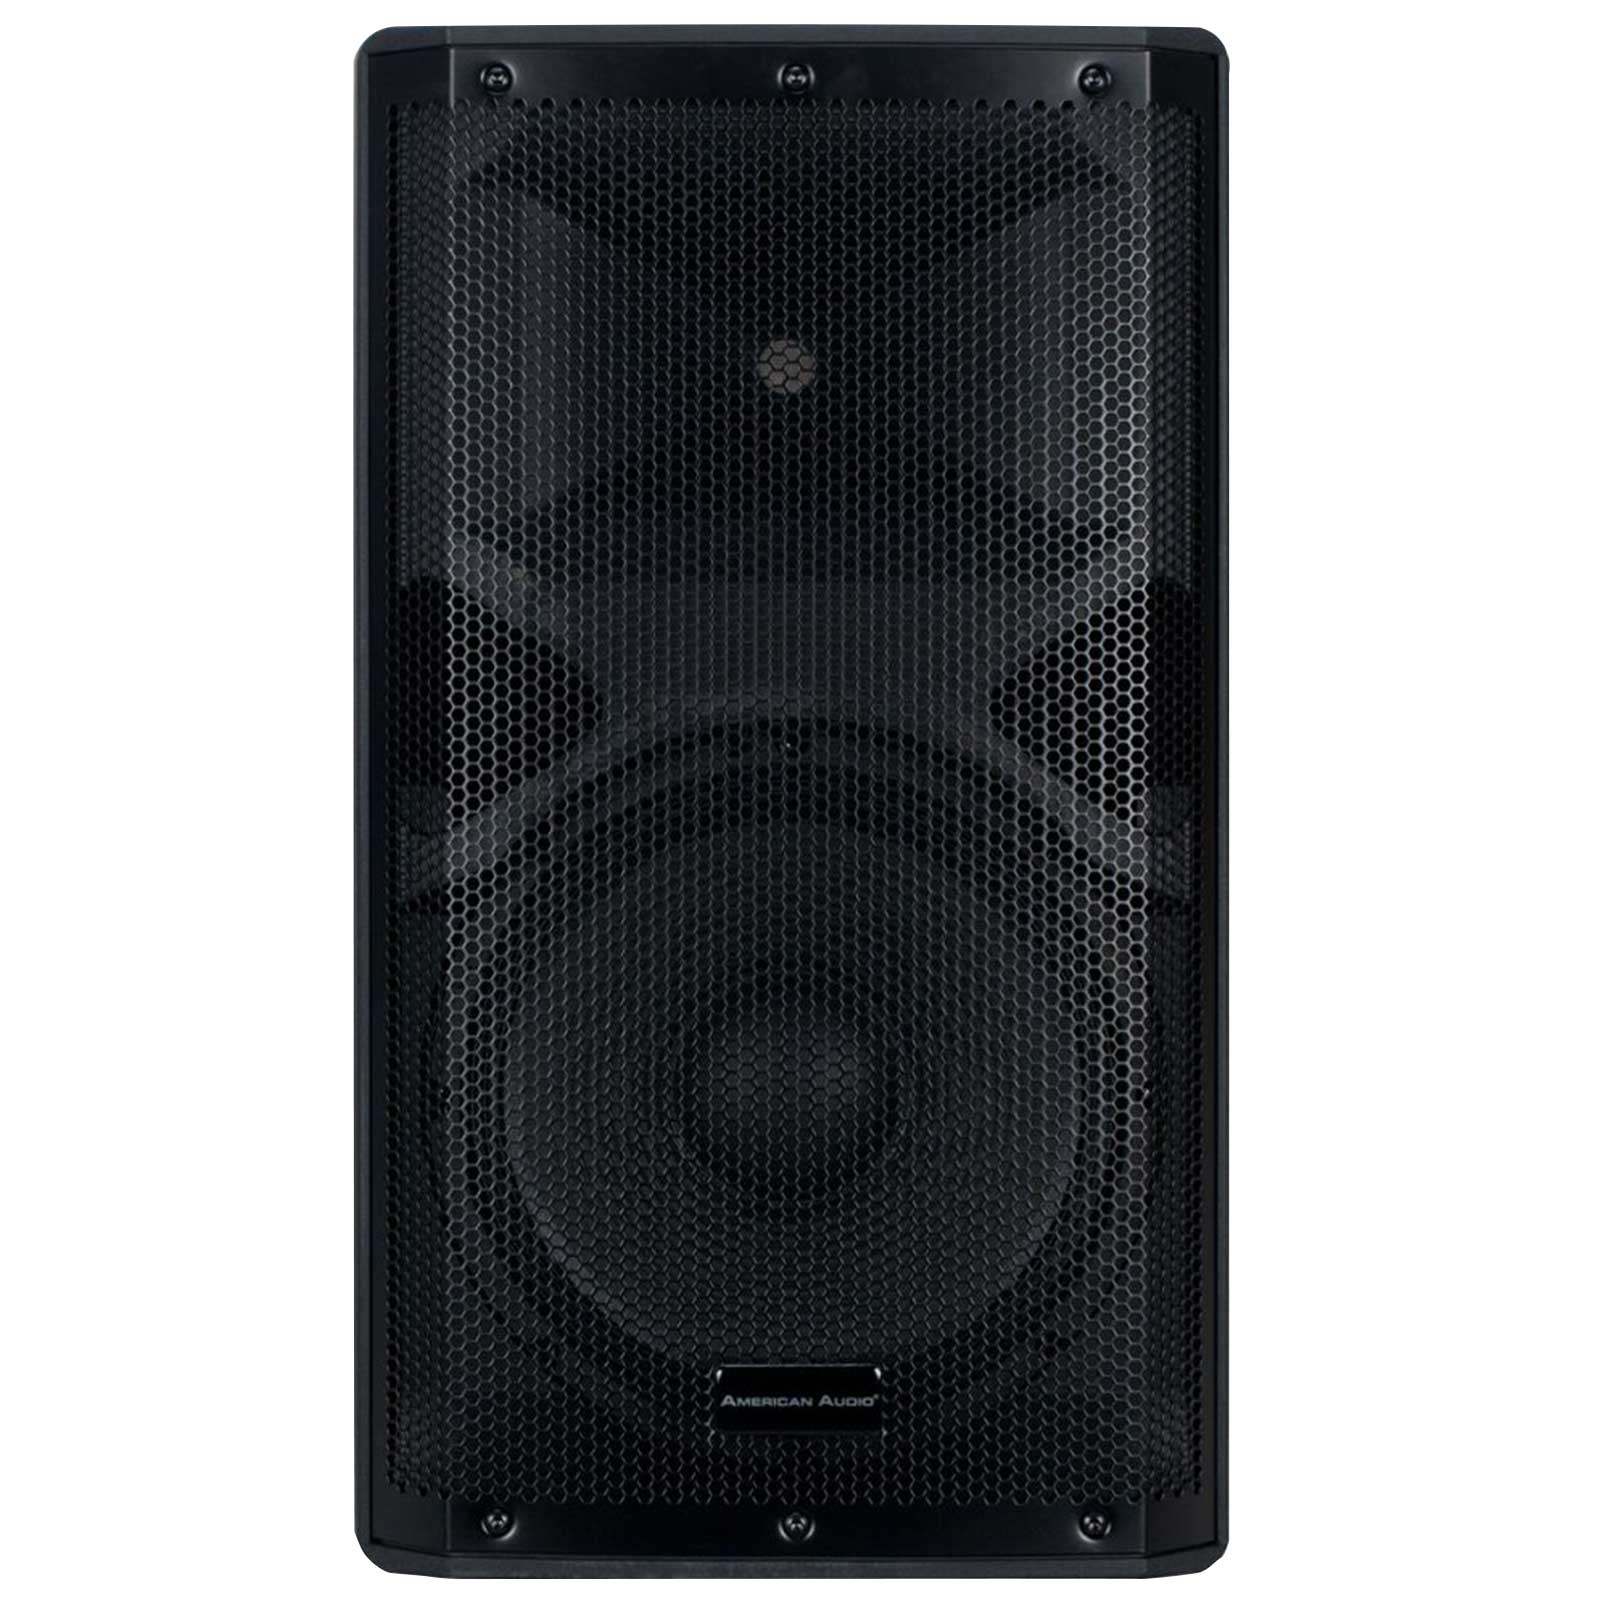 American Audio APX12 GO BT 12" 2-Way Battery Powered 200W Active Loudspeaker with Tripod Speaker Stand Package - image 4 of 9